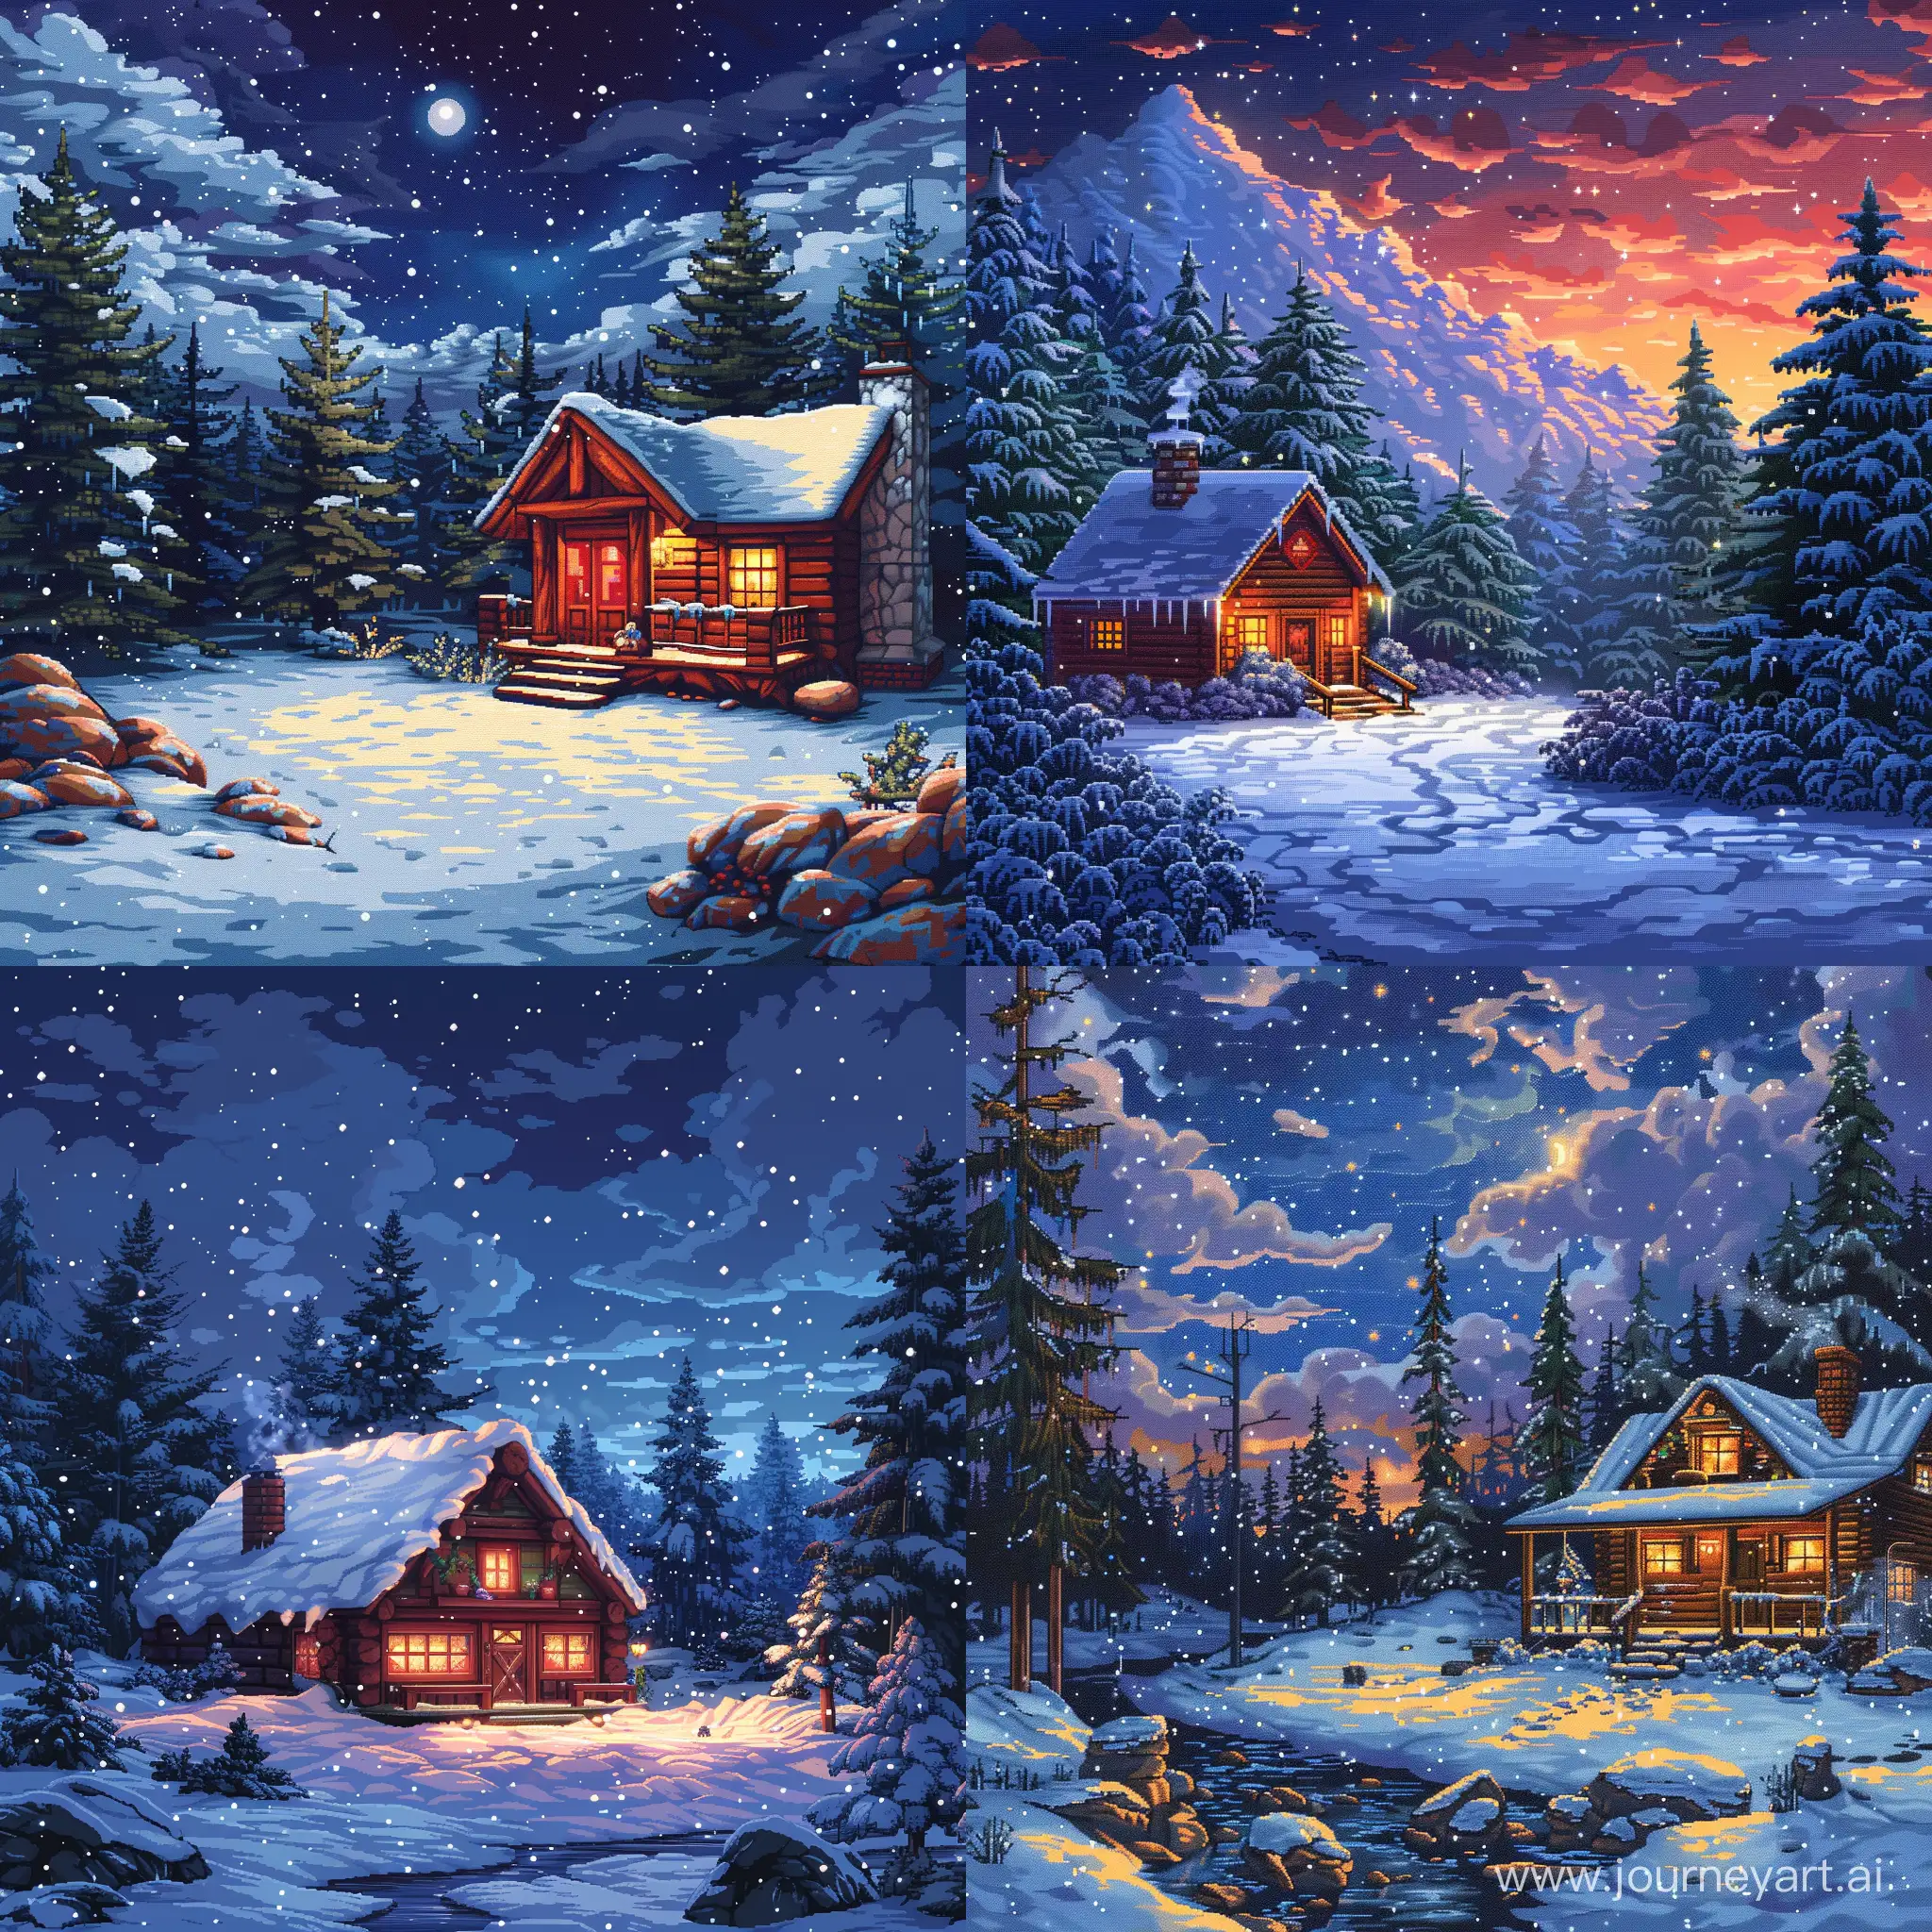 Cozy-Cabin-in-Snowy-Night-8Bit-Pixel-Art-Illustration-with-Bold-Color-Details